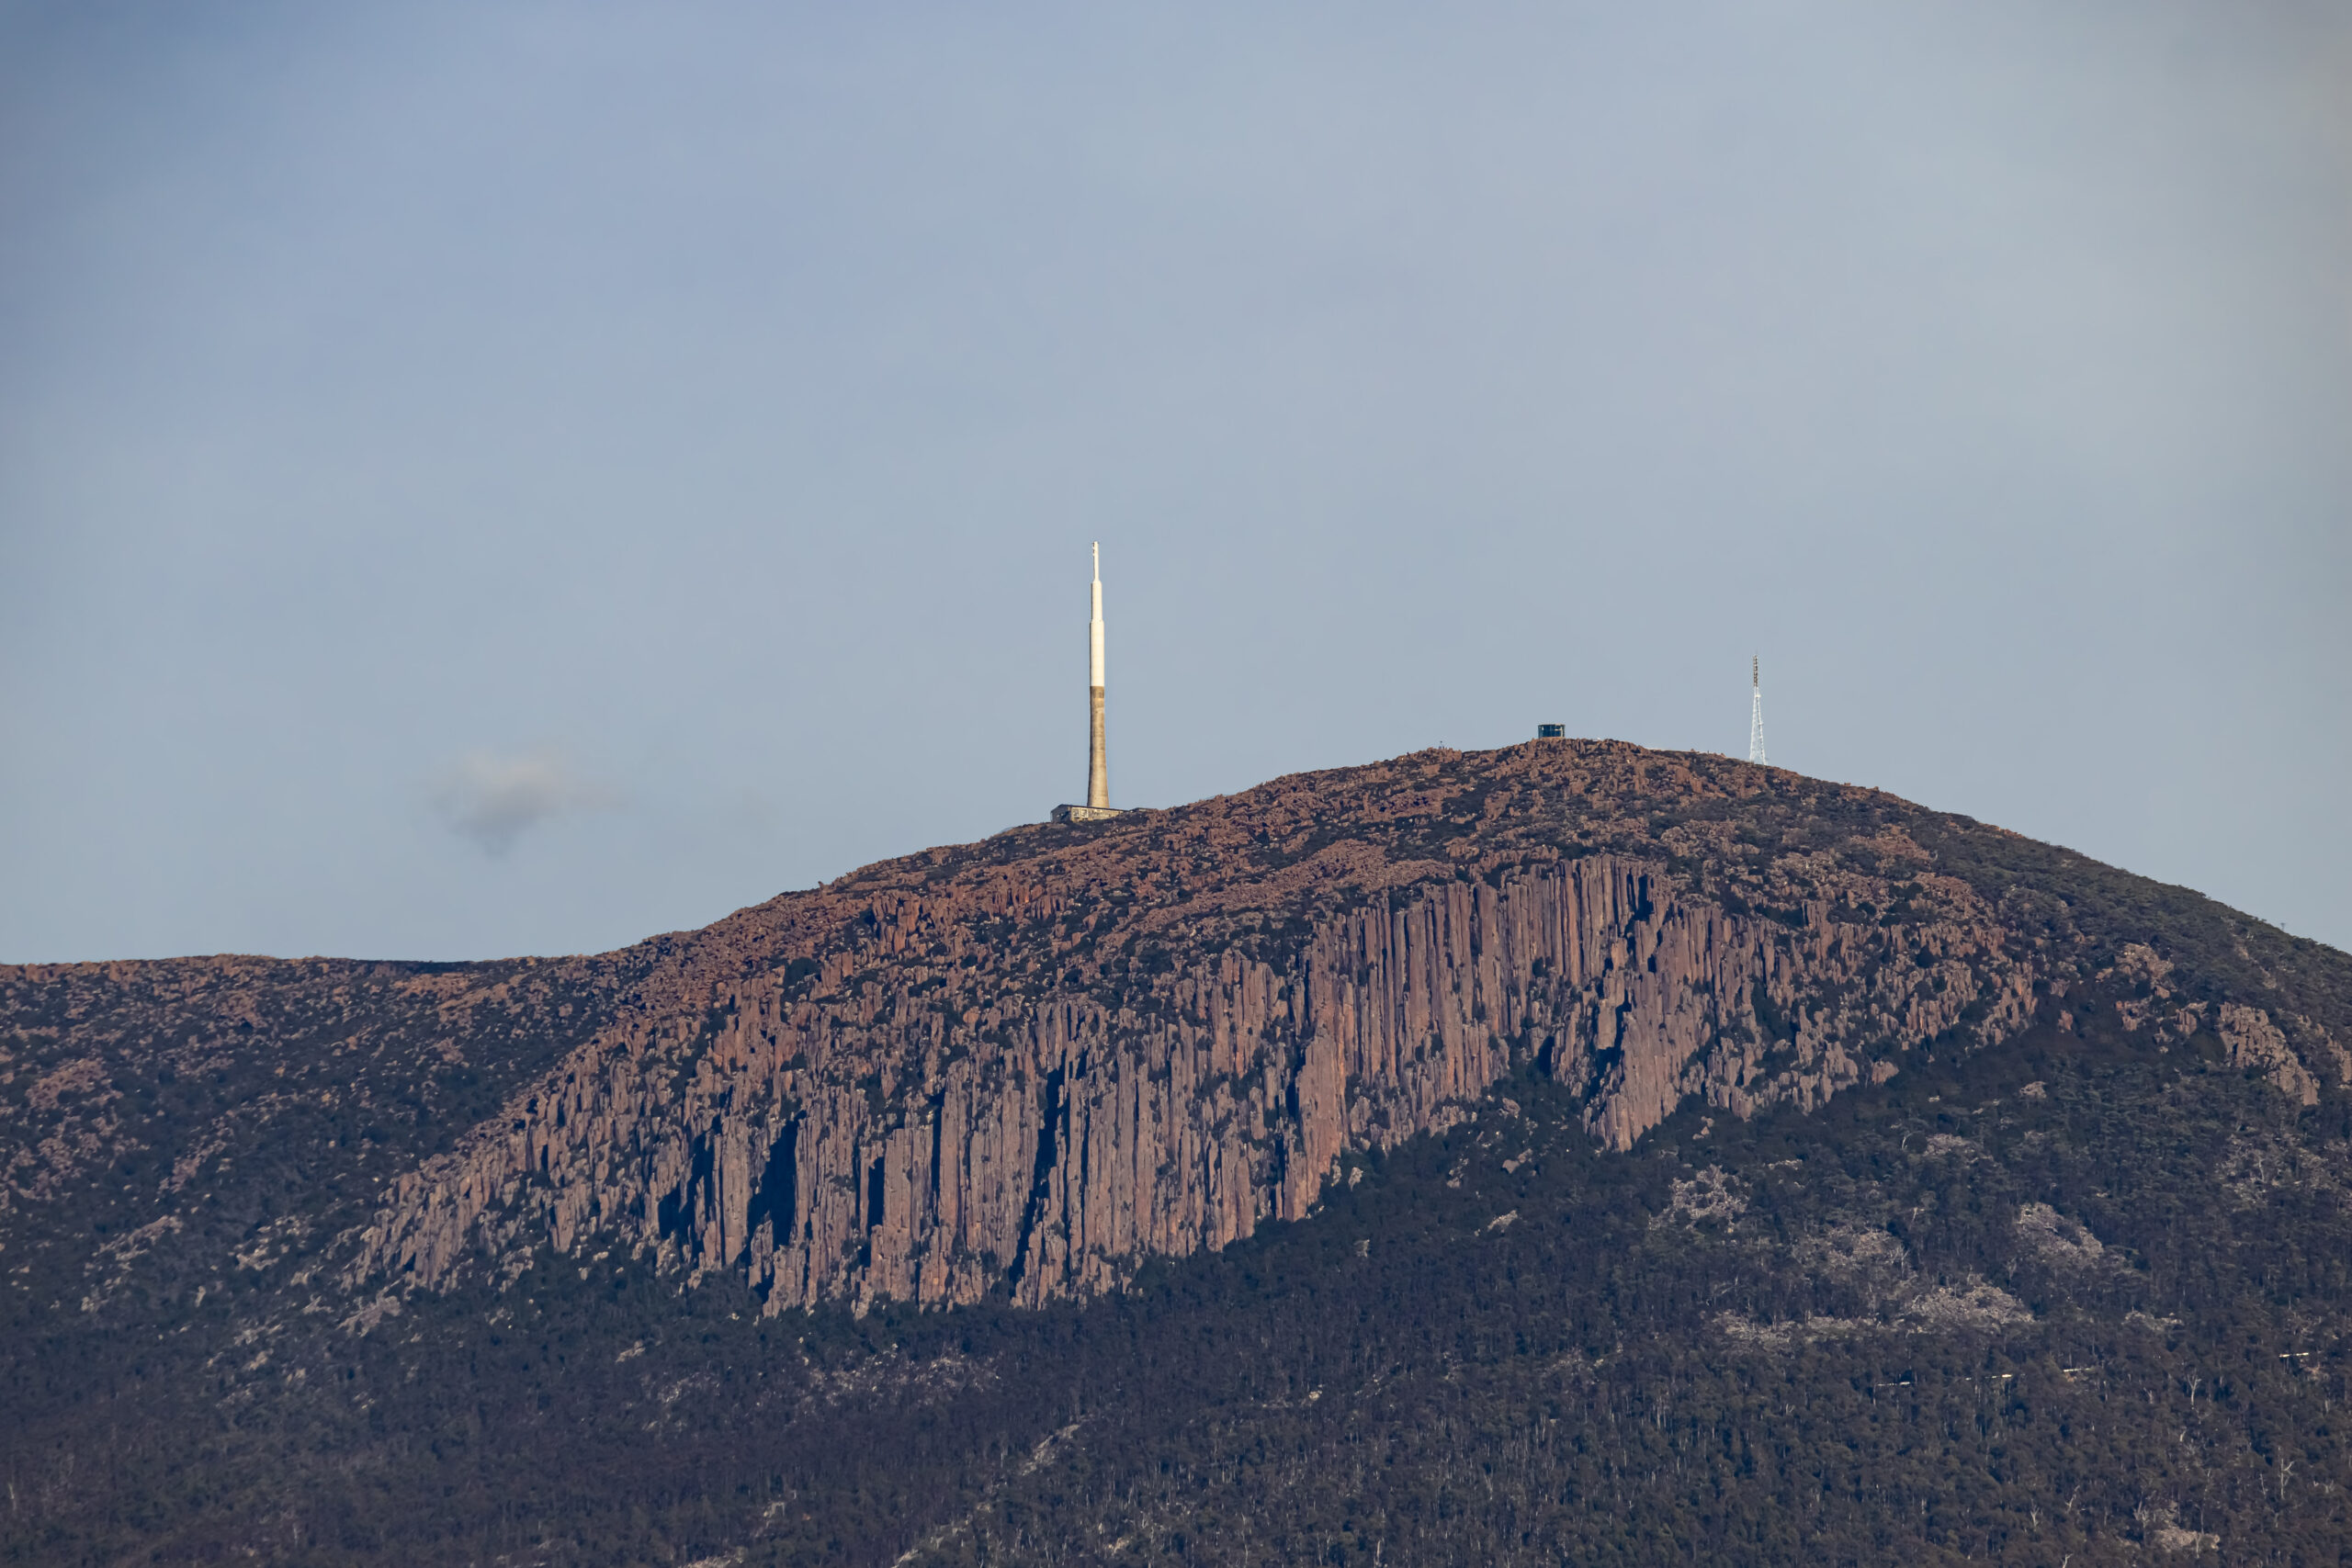 A zoomed in photo of a mountain with a large tower on its summit